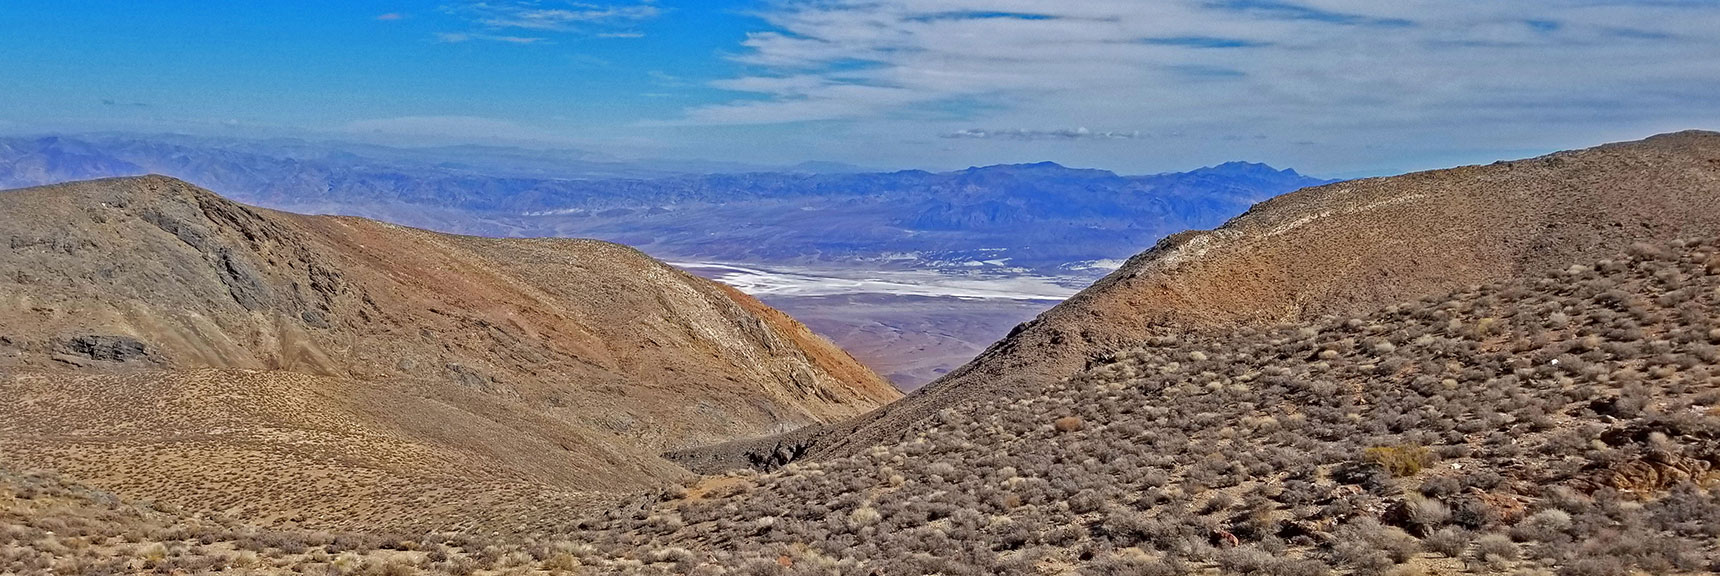 View Down into Death Valley About 6 Miles from Emigrant Canyon Road | Skidoo Stamp Mill, Panamint Mountains, Death Valley National Park, CA